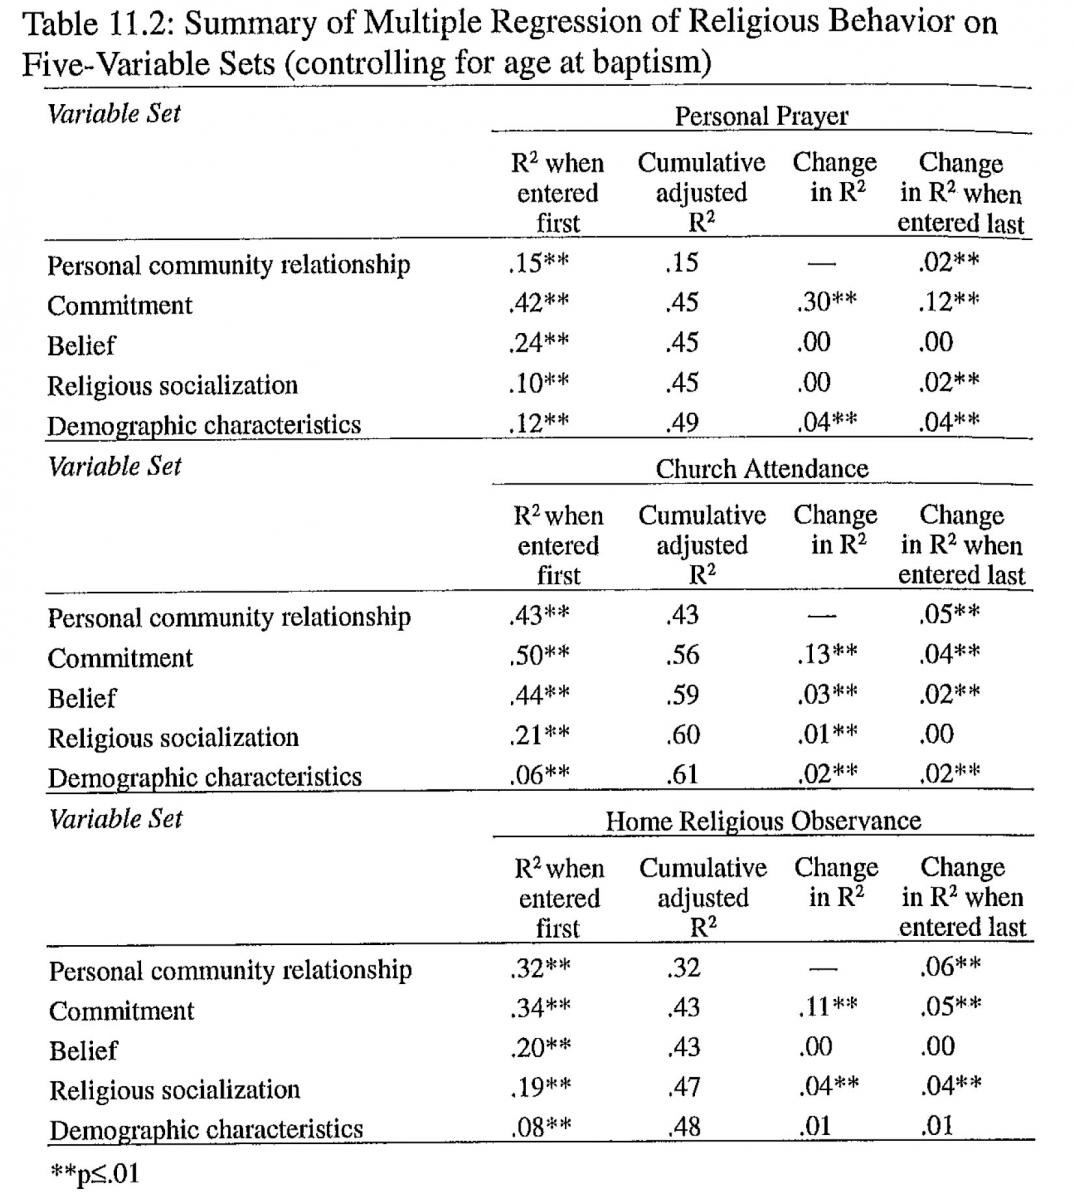 Summary of Multiple Regression of Religious Behavior on Five-Variable Sets